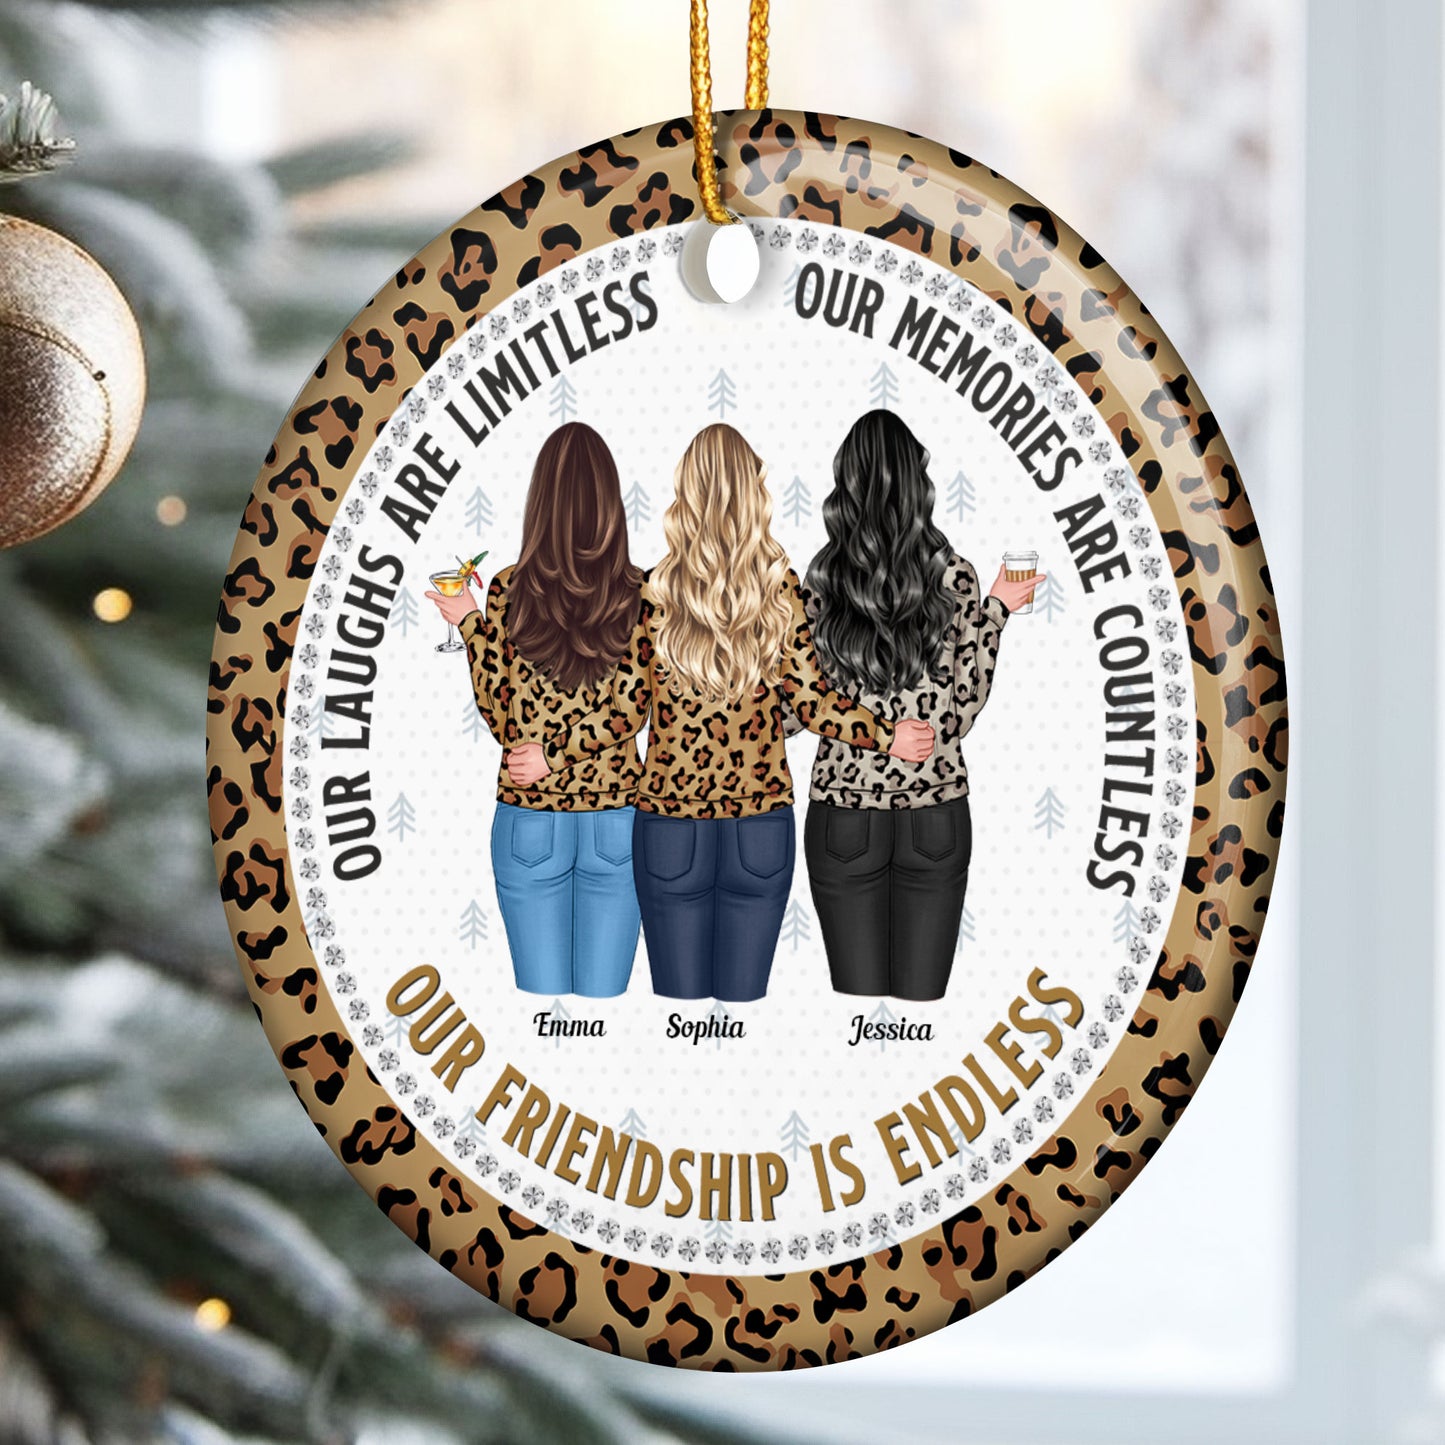 Our Friendship Is Endless Gift For Friend - Personalized Ceramic Ornament